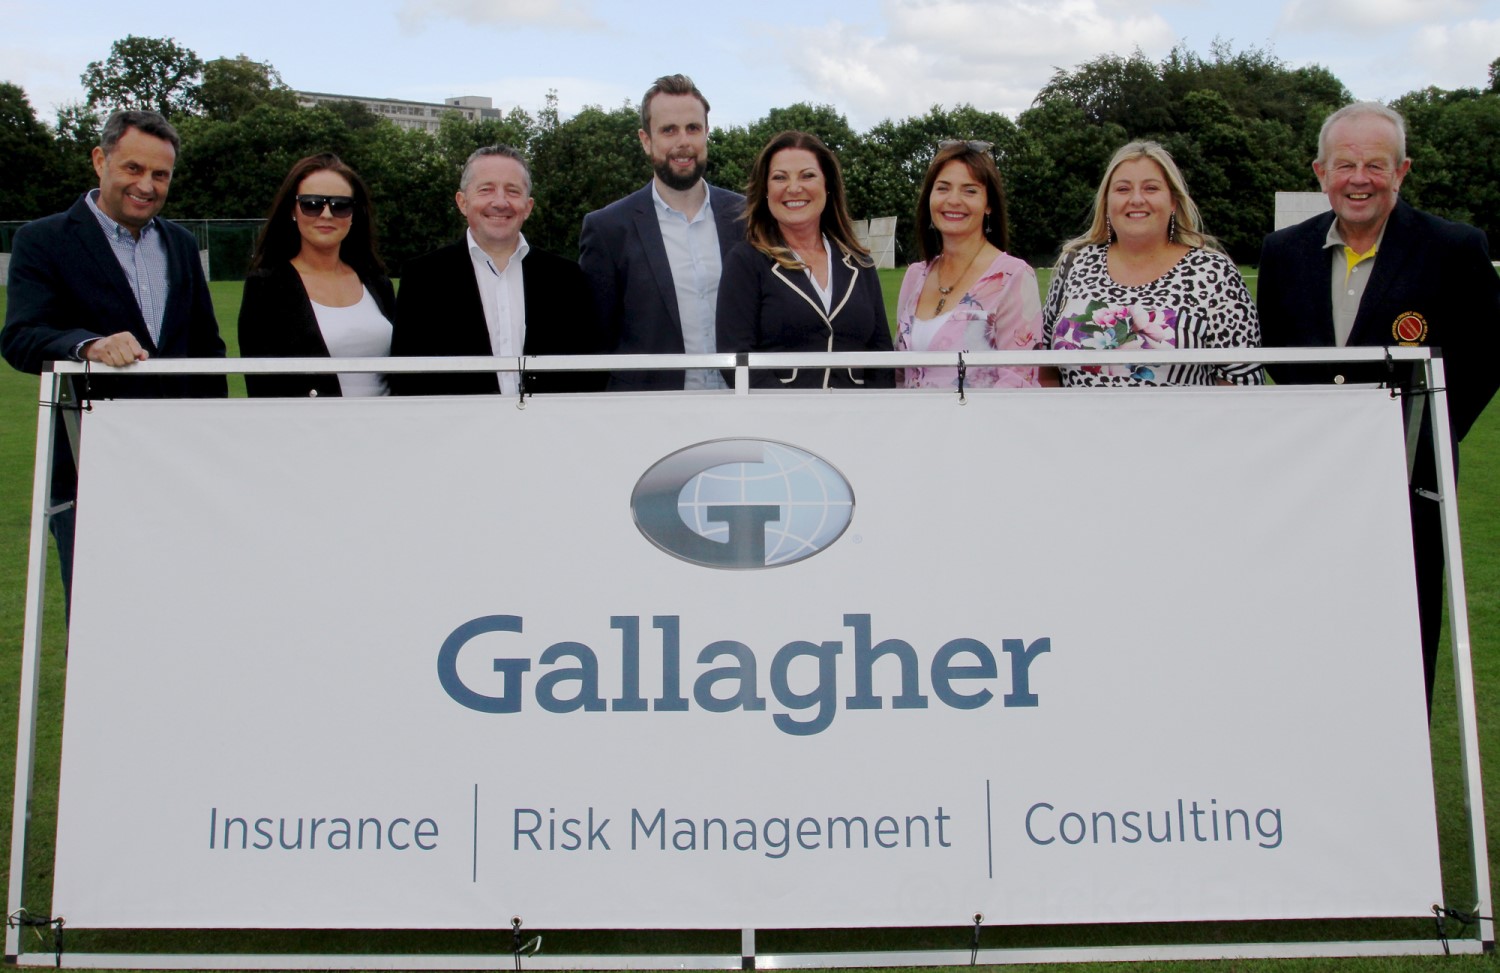 Gallaghers' representatives at today's match